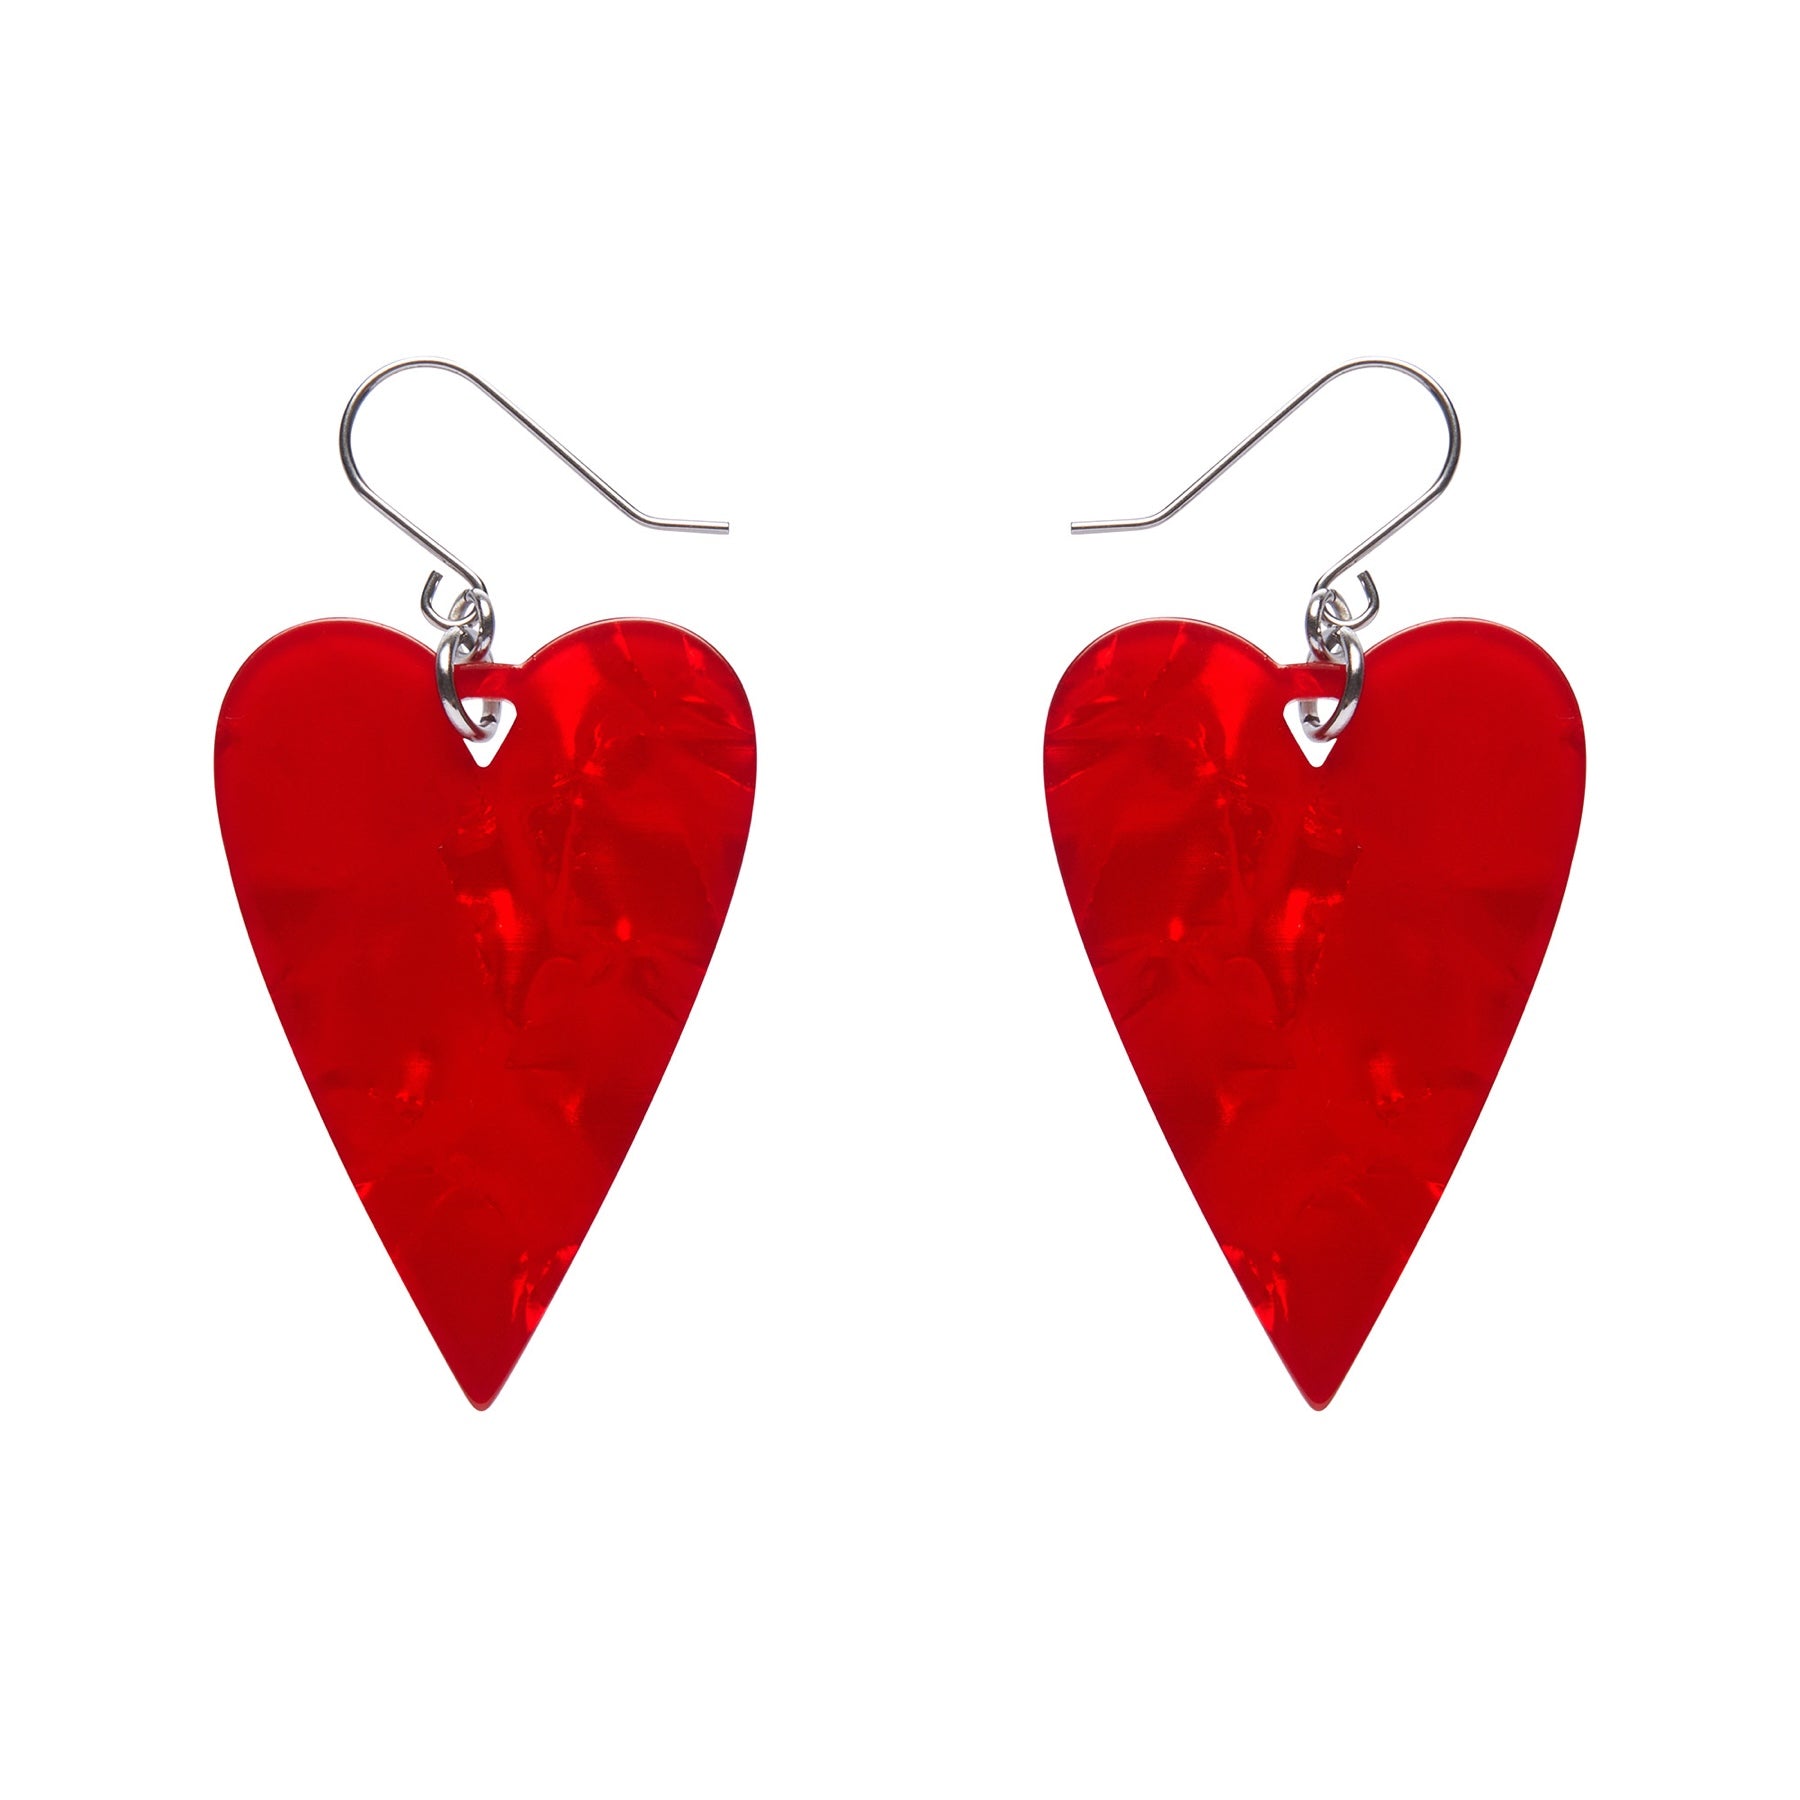 Essentials "From the Heart" Dangle Earrings - Red